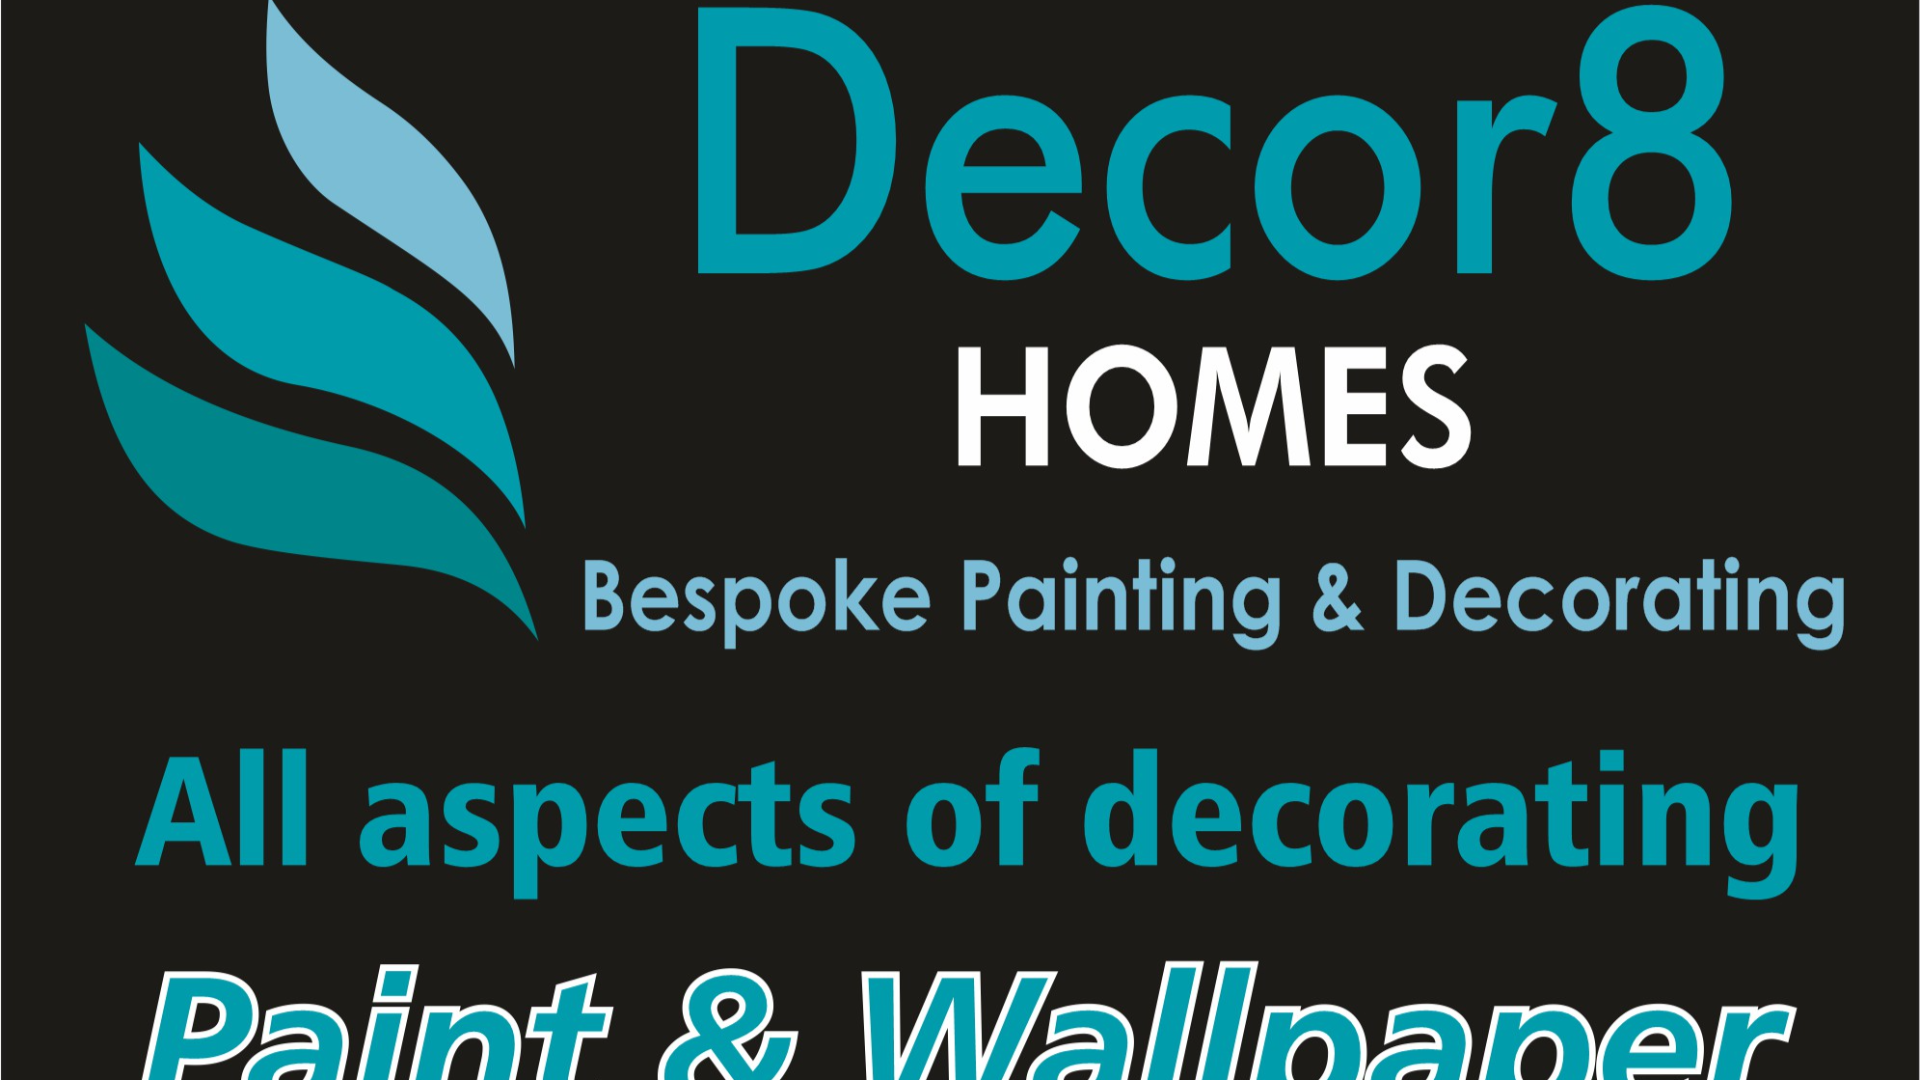 Decor8 Homes in Holywell | Rated People